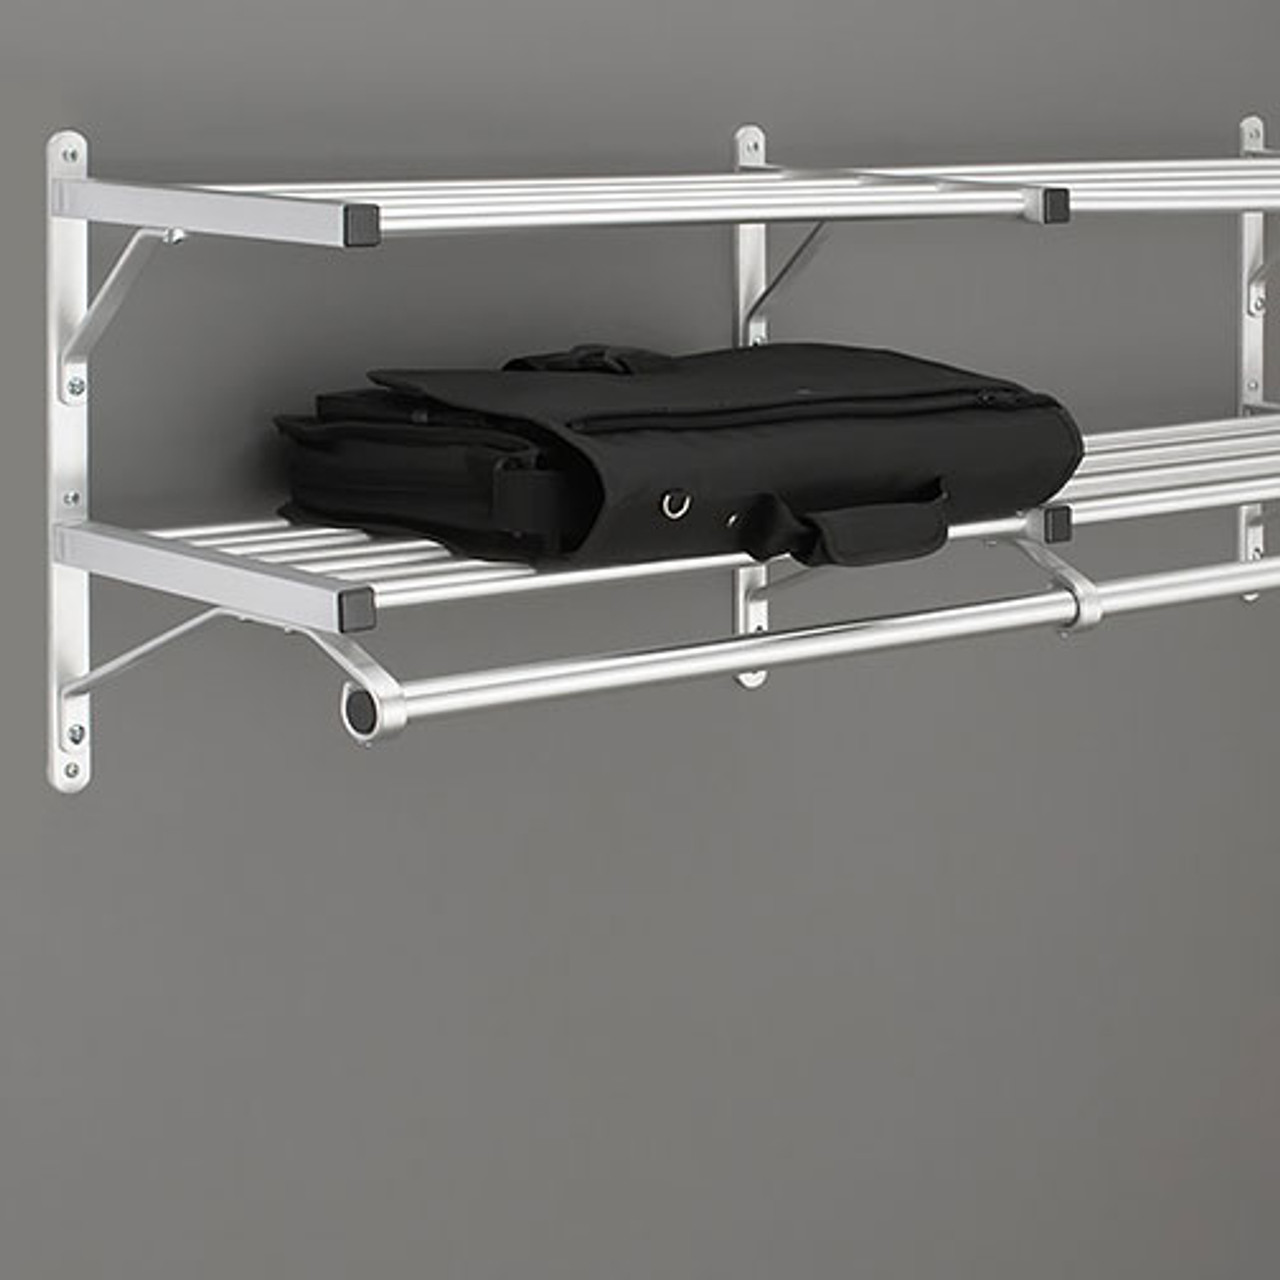 Modular Wall Double Shelf Coat Rack with Hanger Rod - 202 Series - Image Illustrates Design, Not to Scale